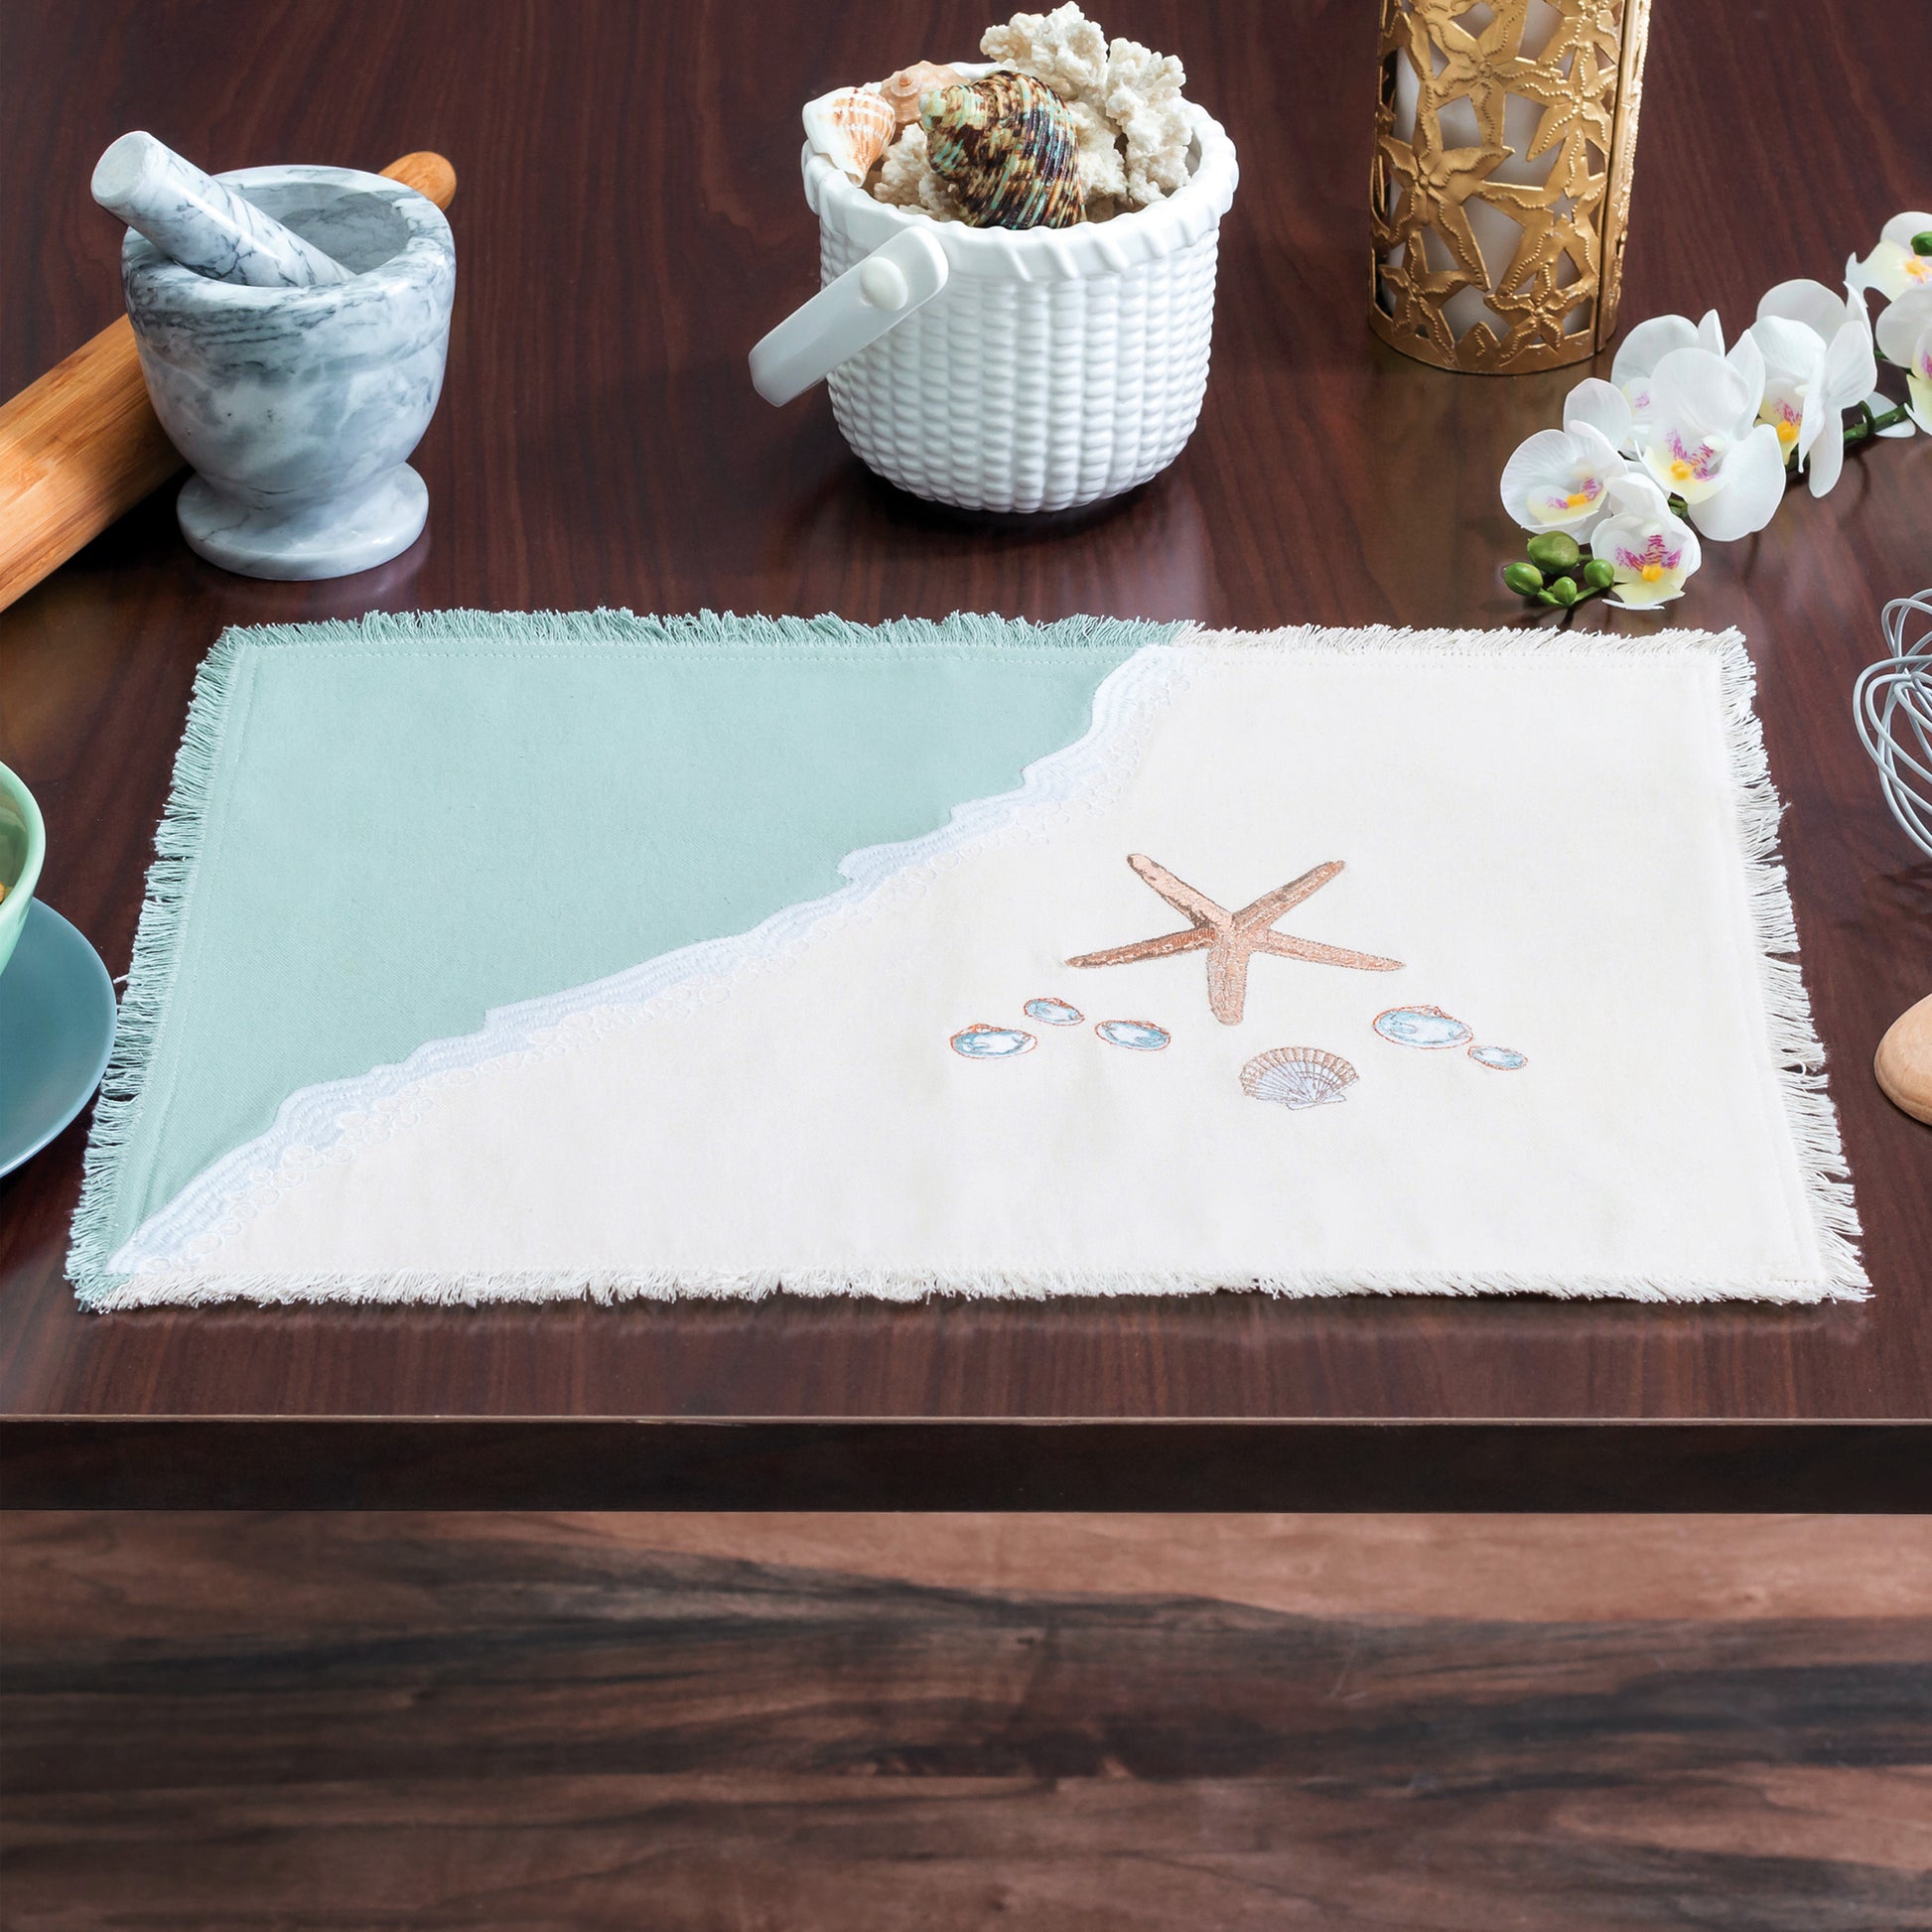 Sea stars and sea shells embroidered on a cotton and placemat featuring a wave washing onto the beach, finished with fringe edges SET ONA  WOODEN TALBE WITH ACCESSORIES.